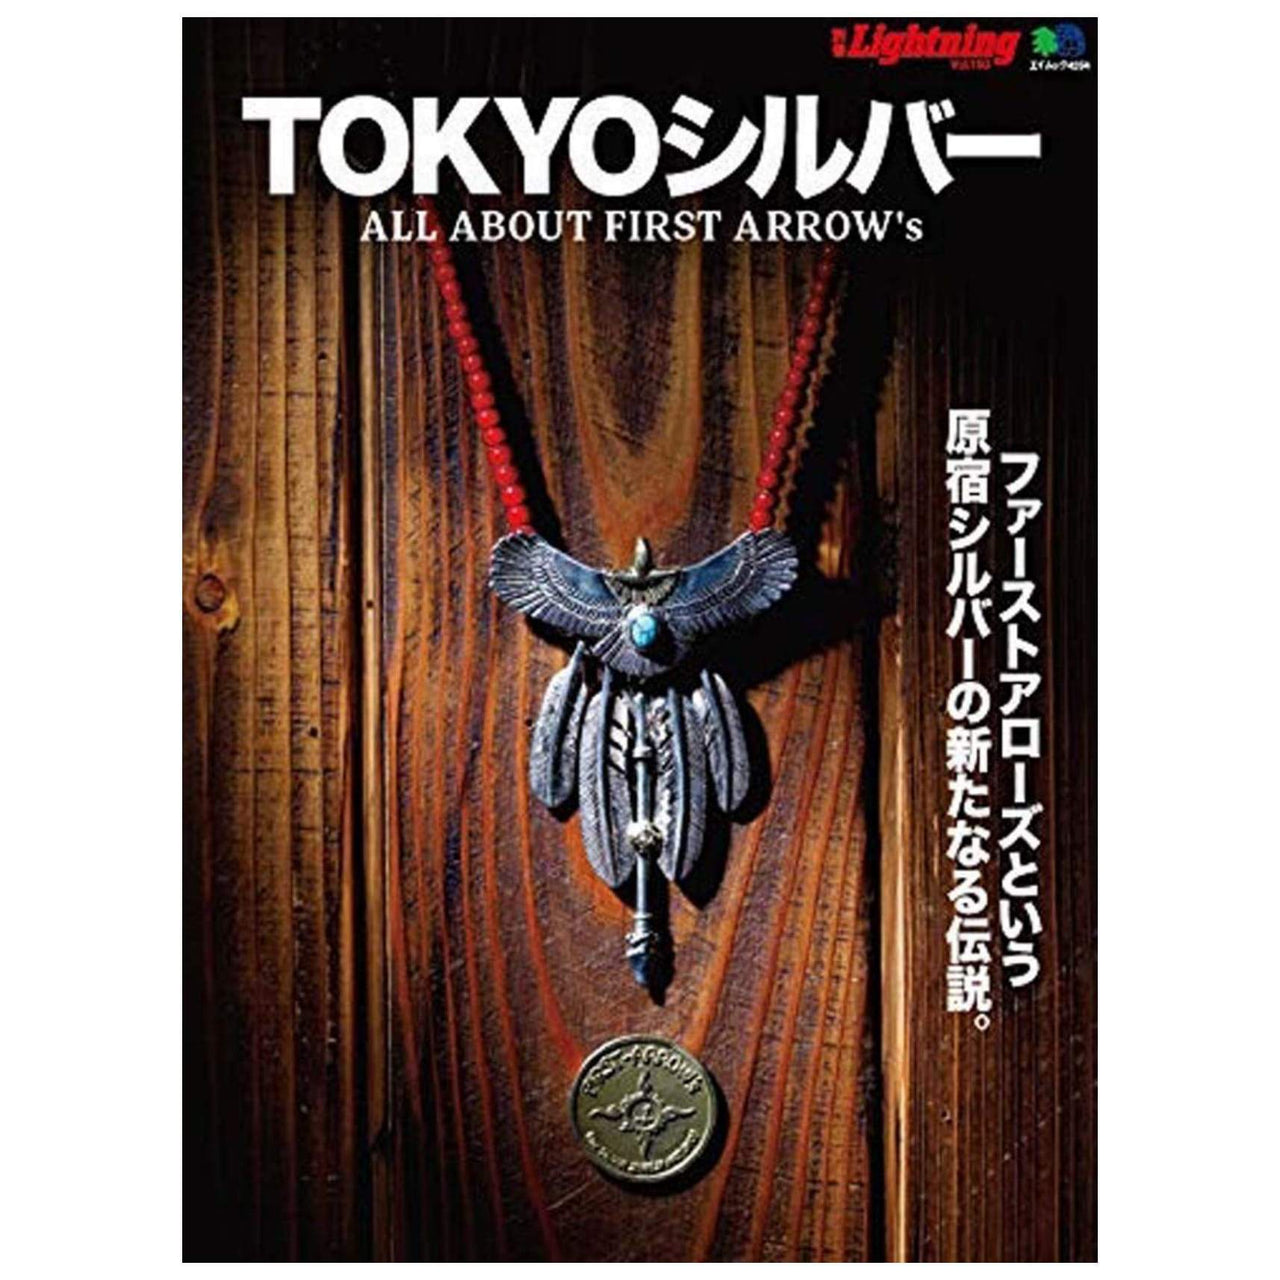 Lightning Archives Vol.193 "All About First Arrows"-Magazine-Clutch Cafe